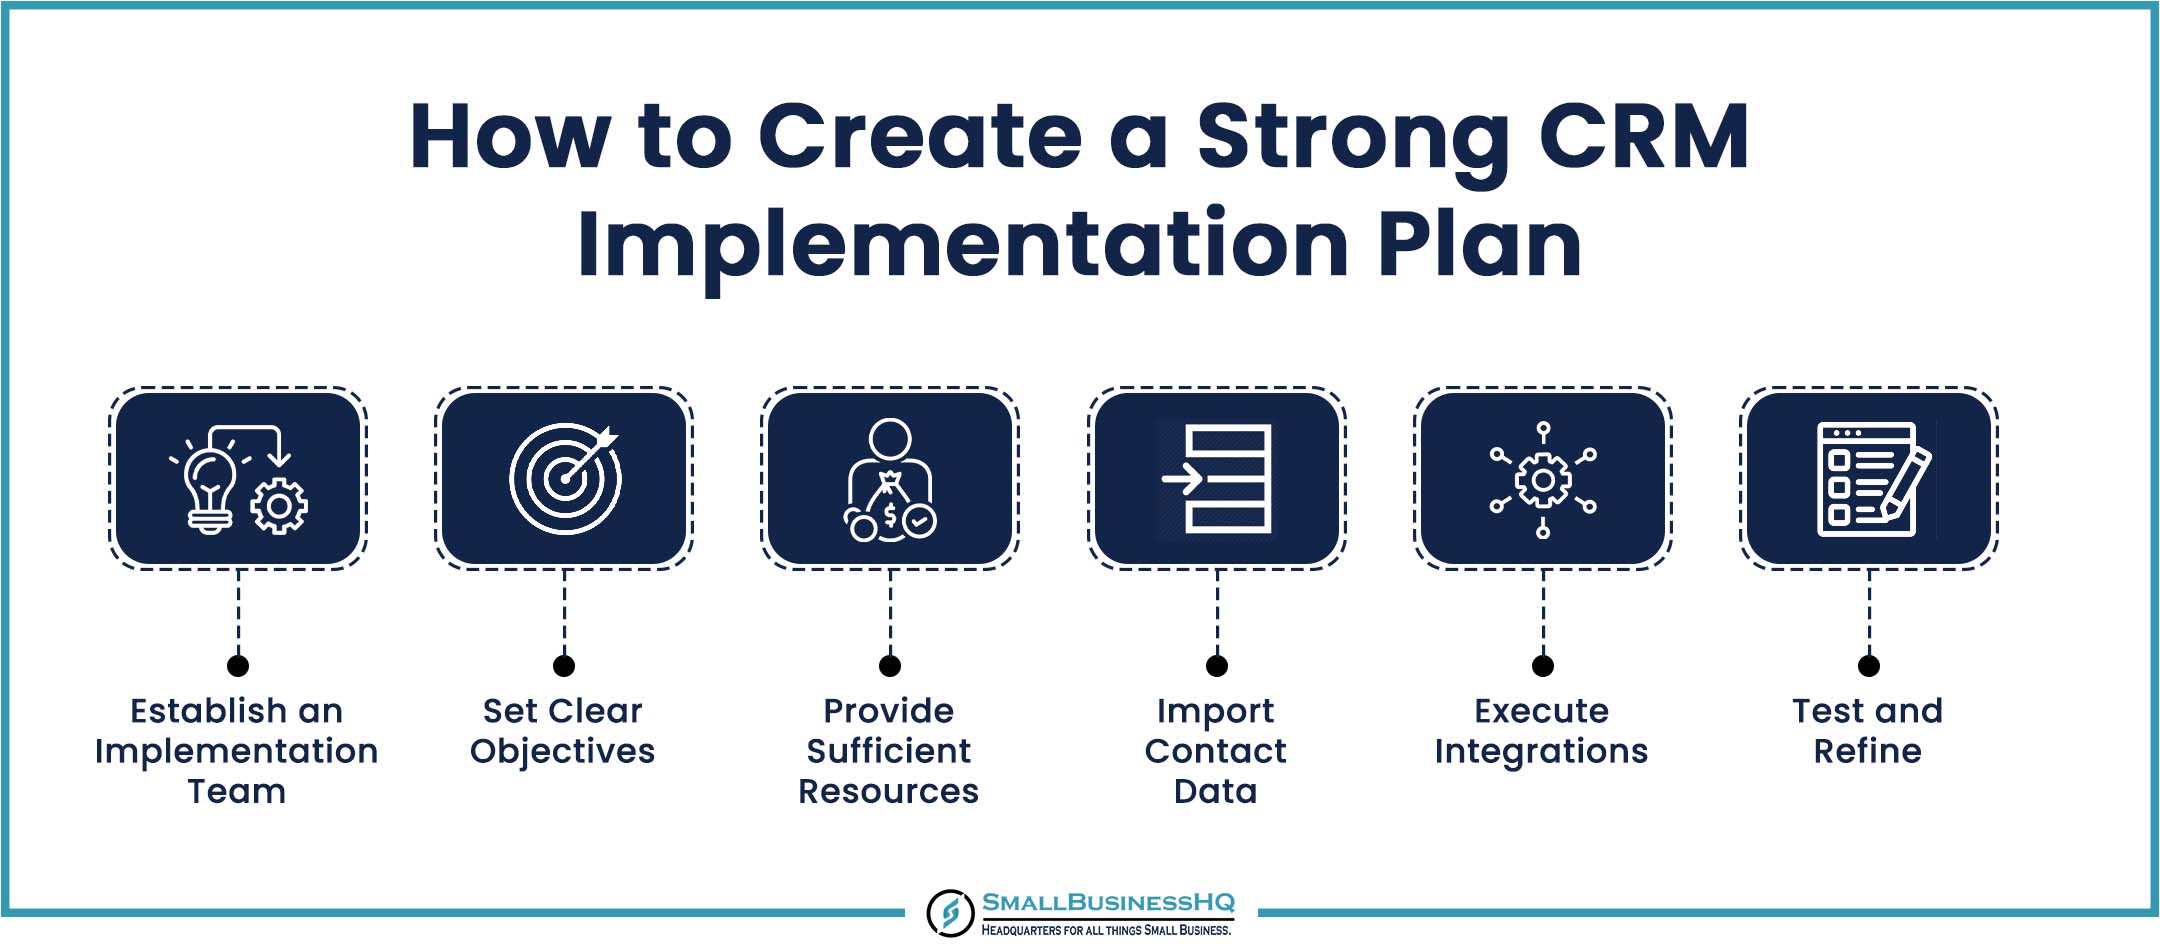 How to Create a Strong CRM Implementation Plan